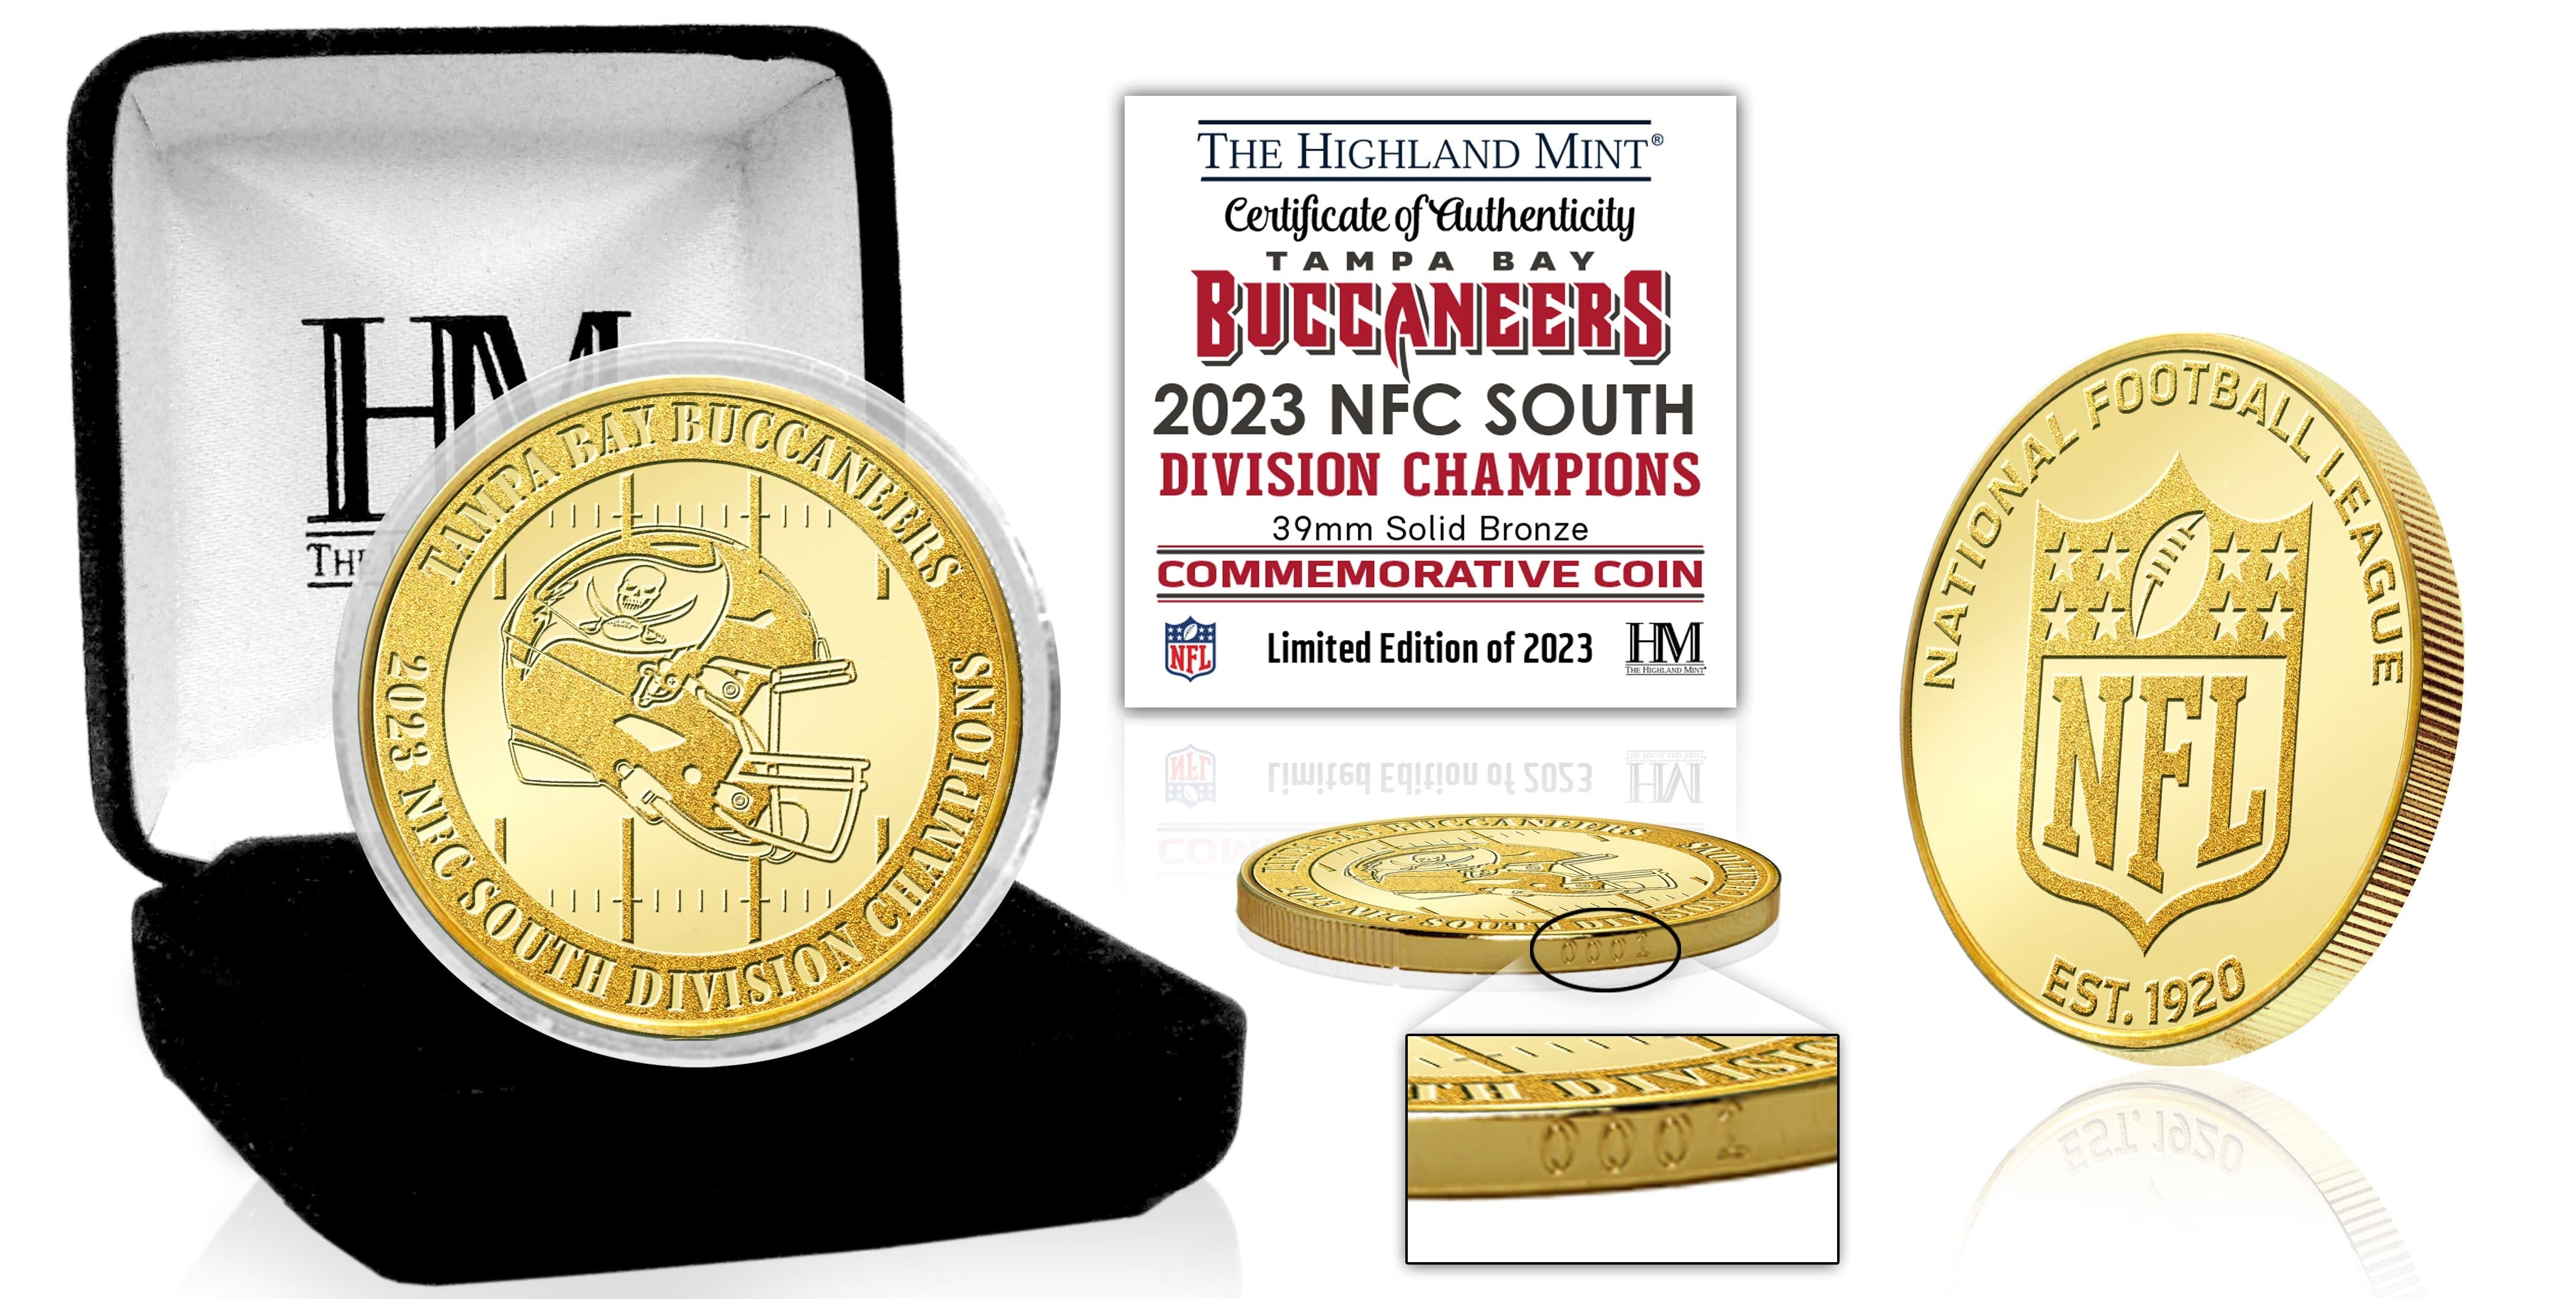 Tampa Bay Buccaneers 2023 NFC South Division Champions Bronze Coin